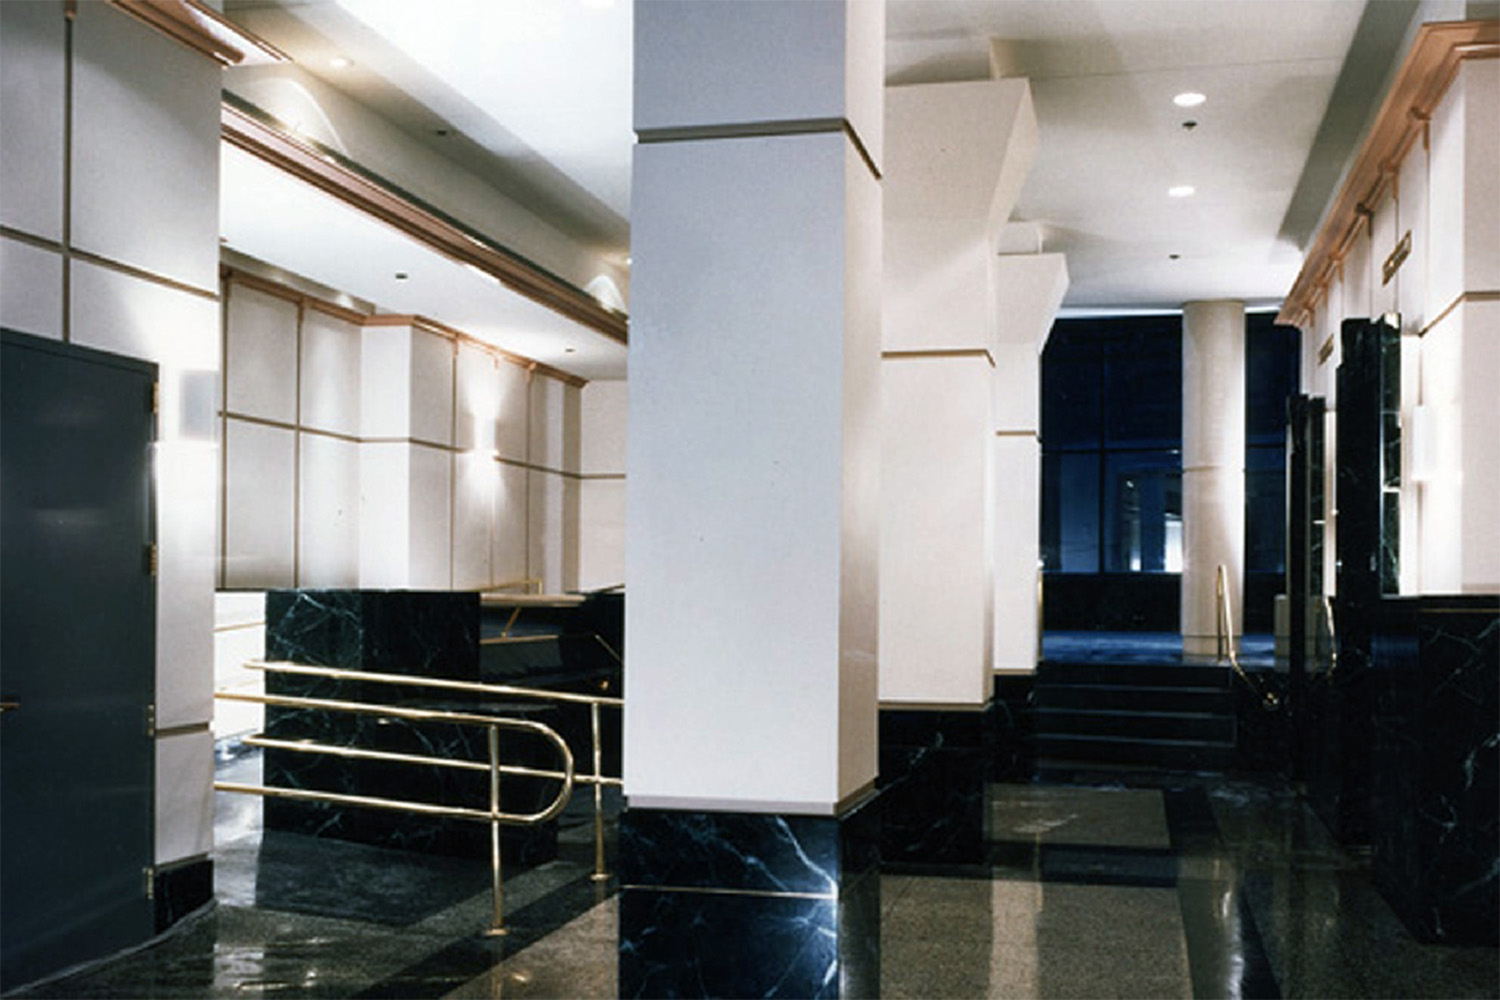 Reception area with white pillars and walls, and black marble flooring